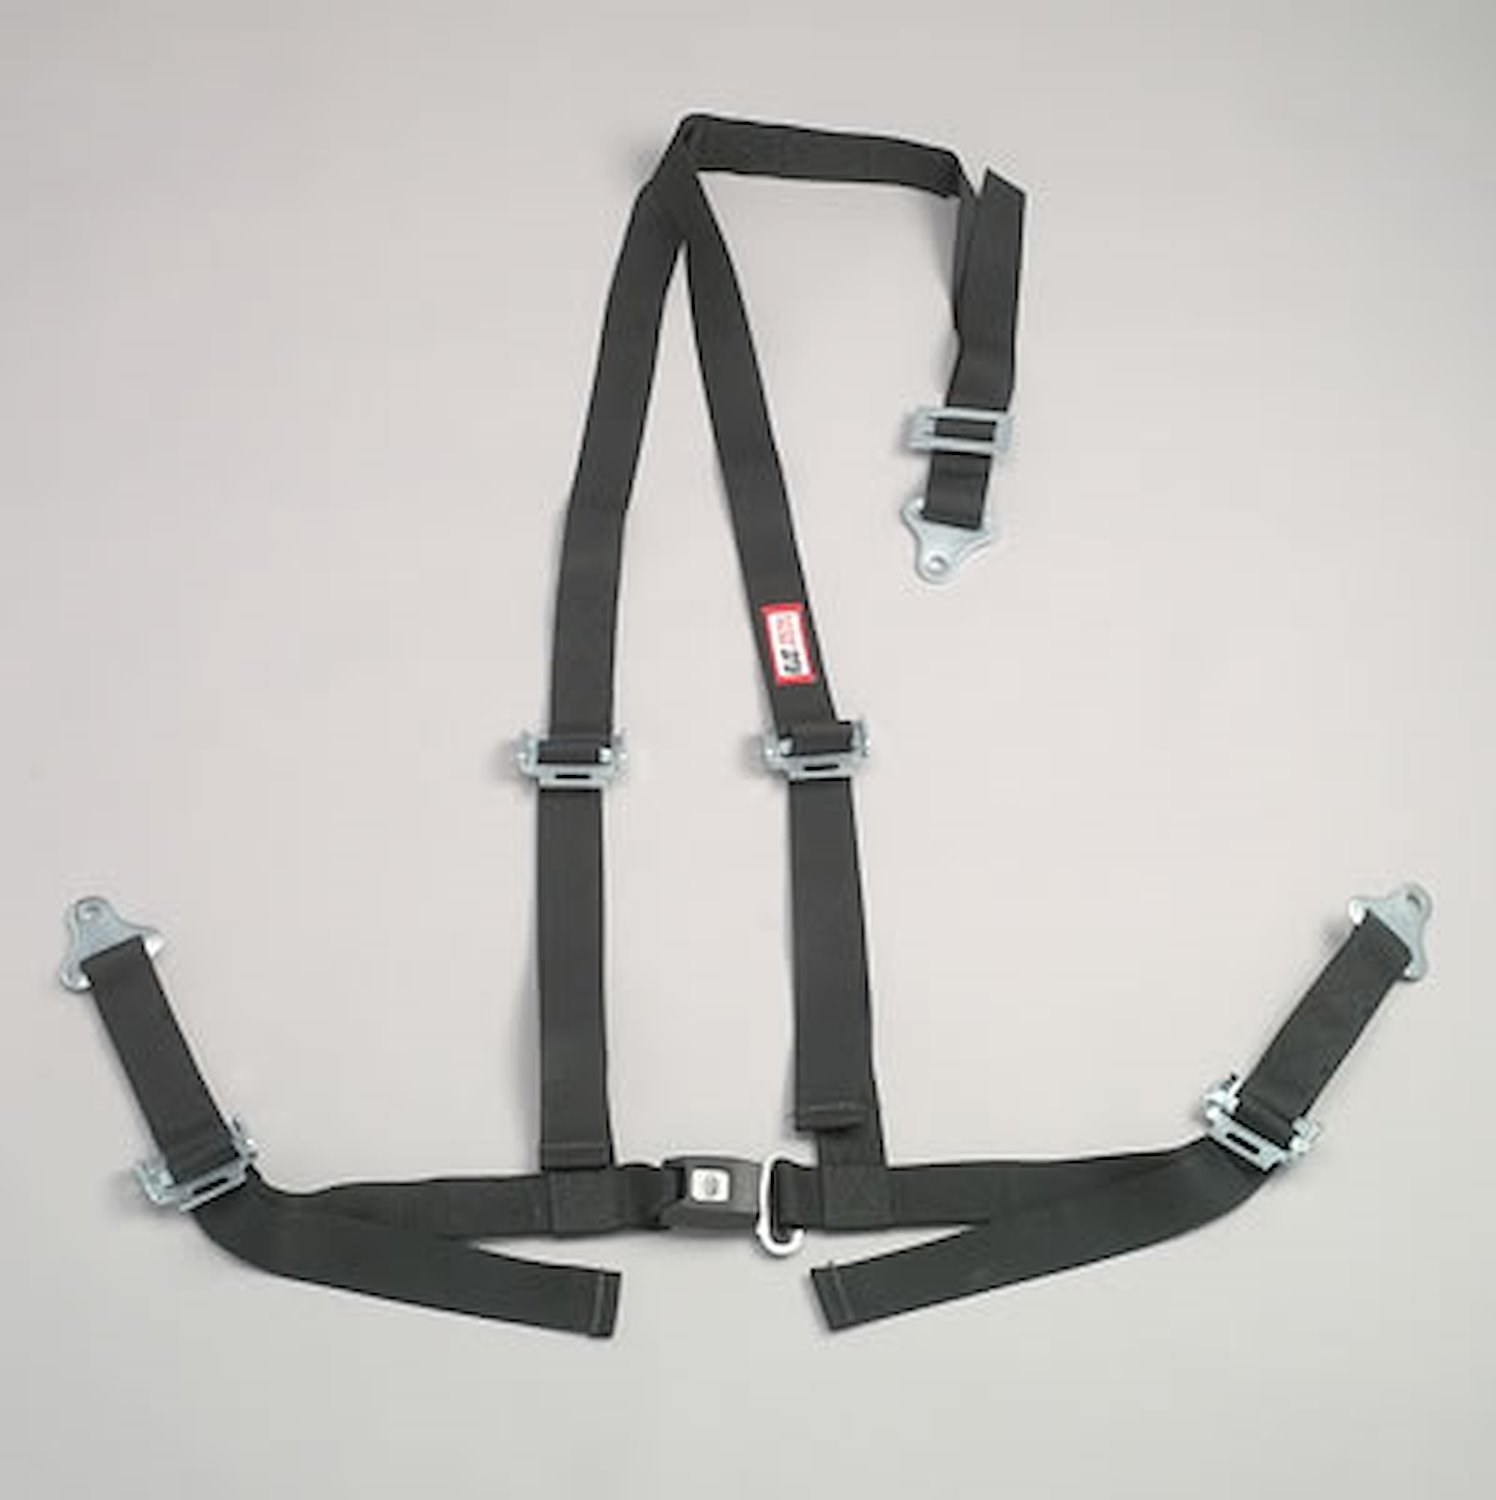 NON-SFI B&T HARNESS 2 PULL UP Lap Belt 2 S. H. Individual ROLL BAR Mount ALL WRAP ENDS RED